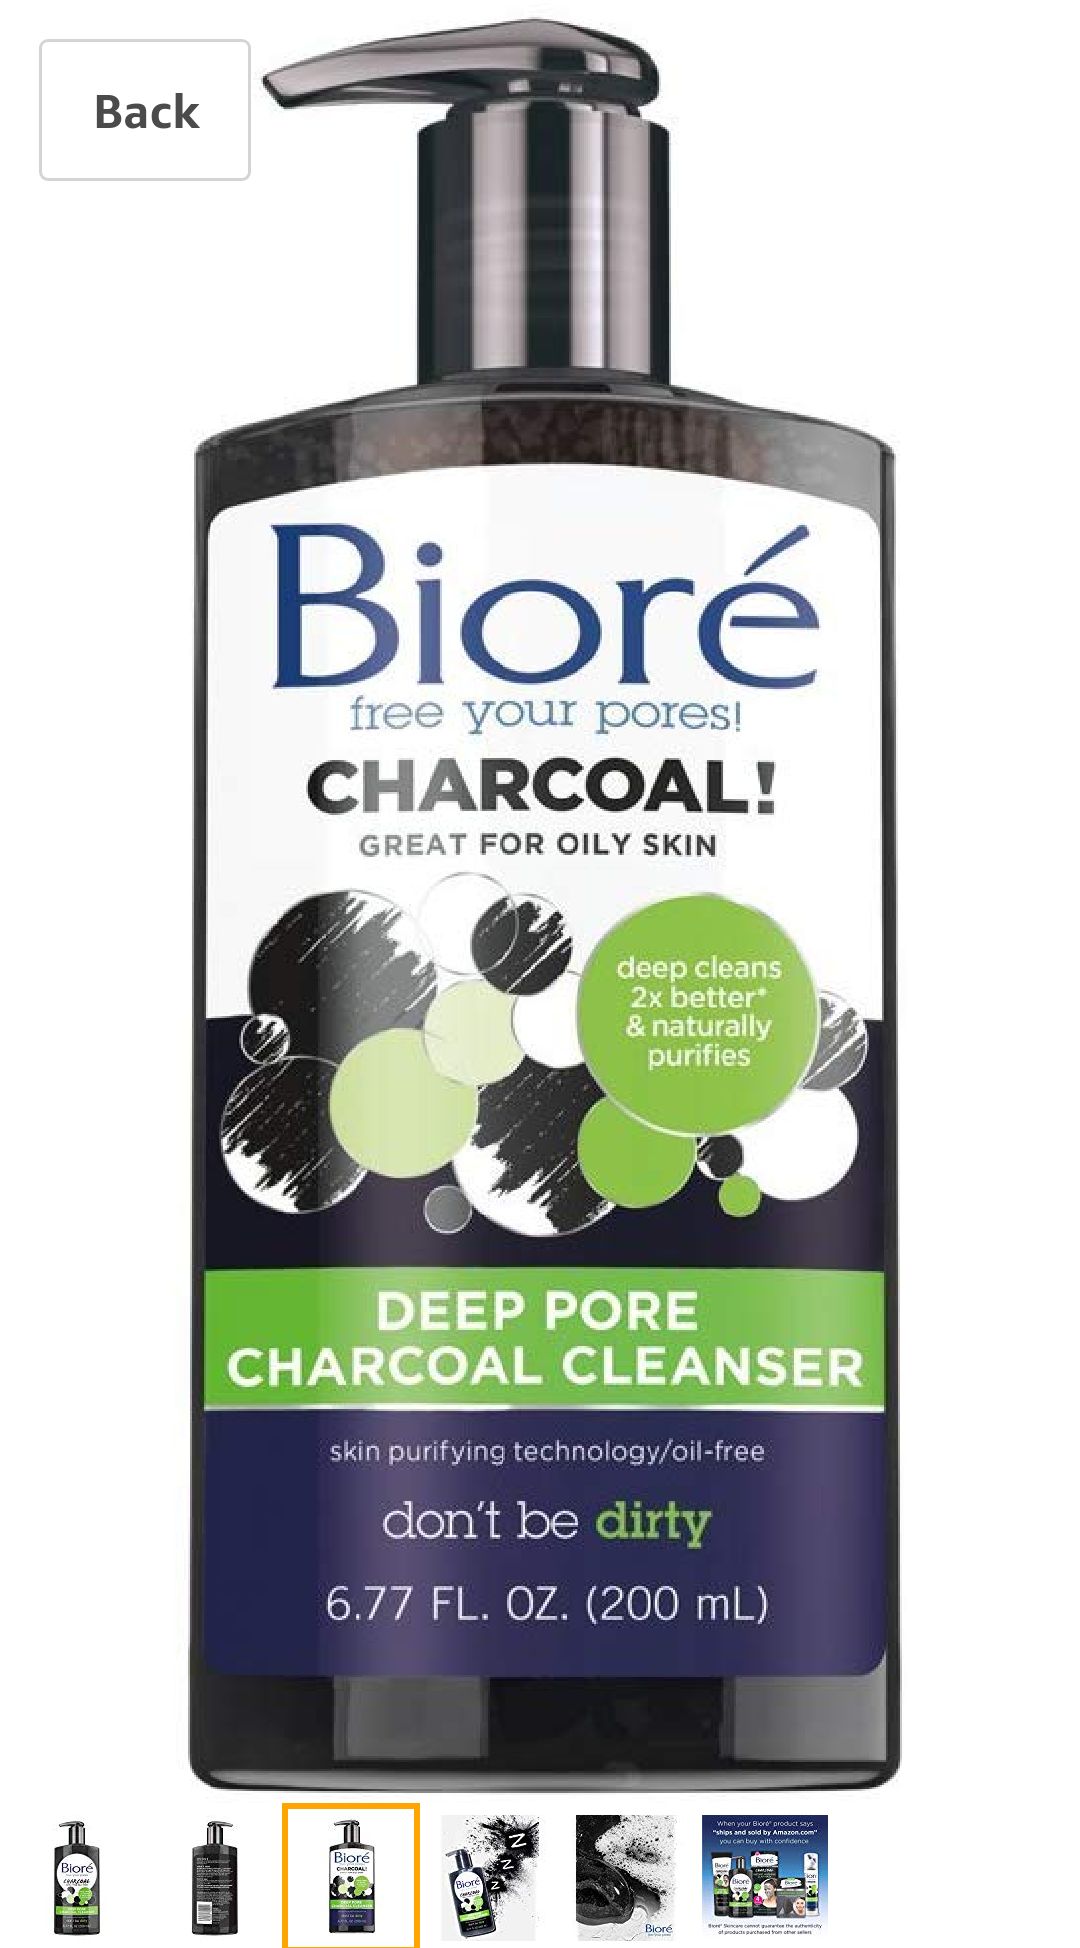 Amazon.com: Bioré Deep Pore Charcoal Cleanser for Oily Skin (6.77 oz) Daily Face Wash, Naturally Purifies Pores, Dermatologist Tested (Packaging May Vary): Beauty洗面奶